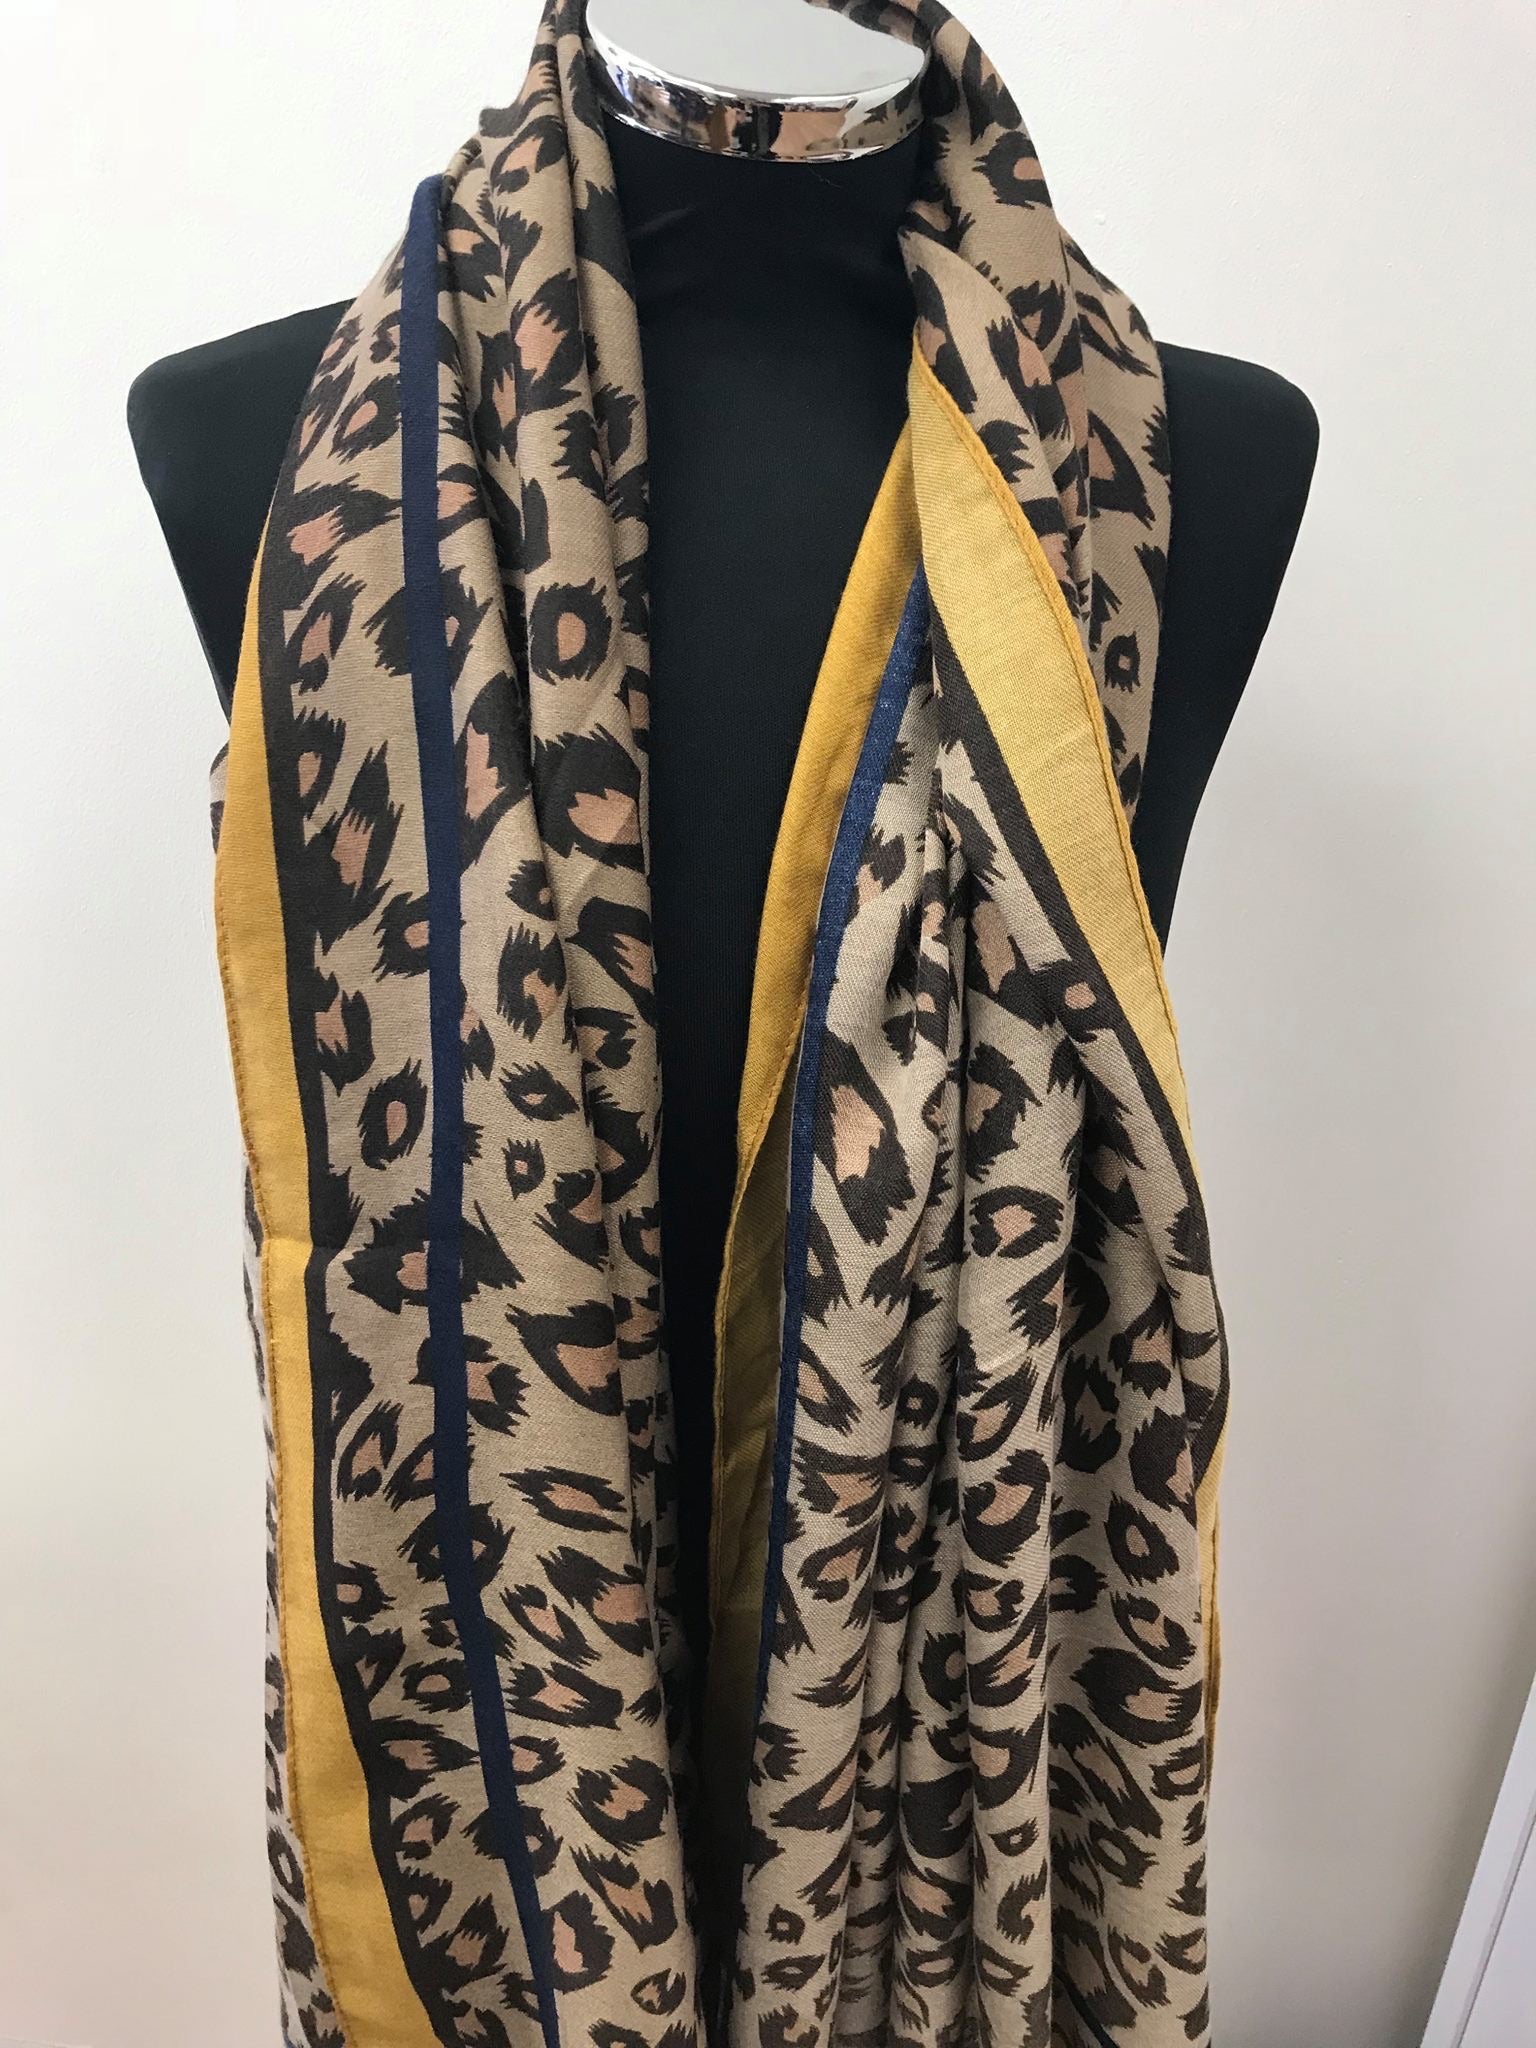 Large Leopard Print Scarf with Mustard Border